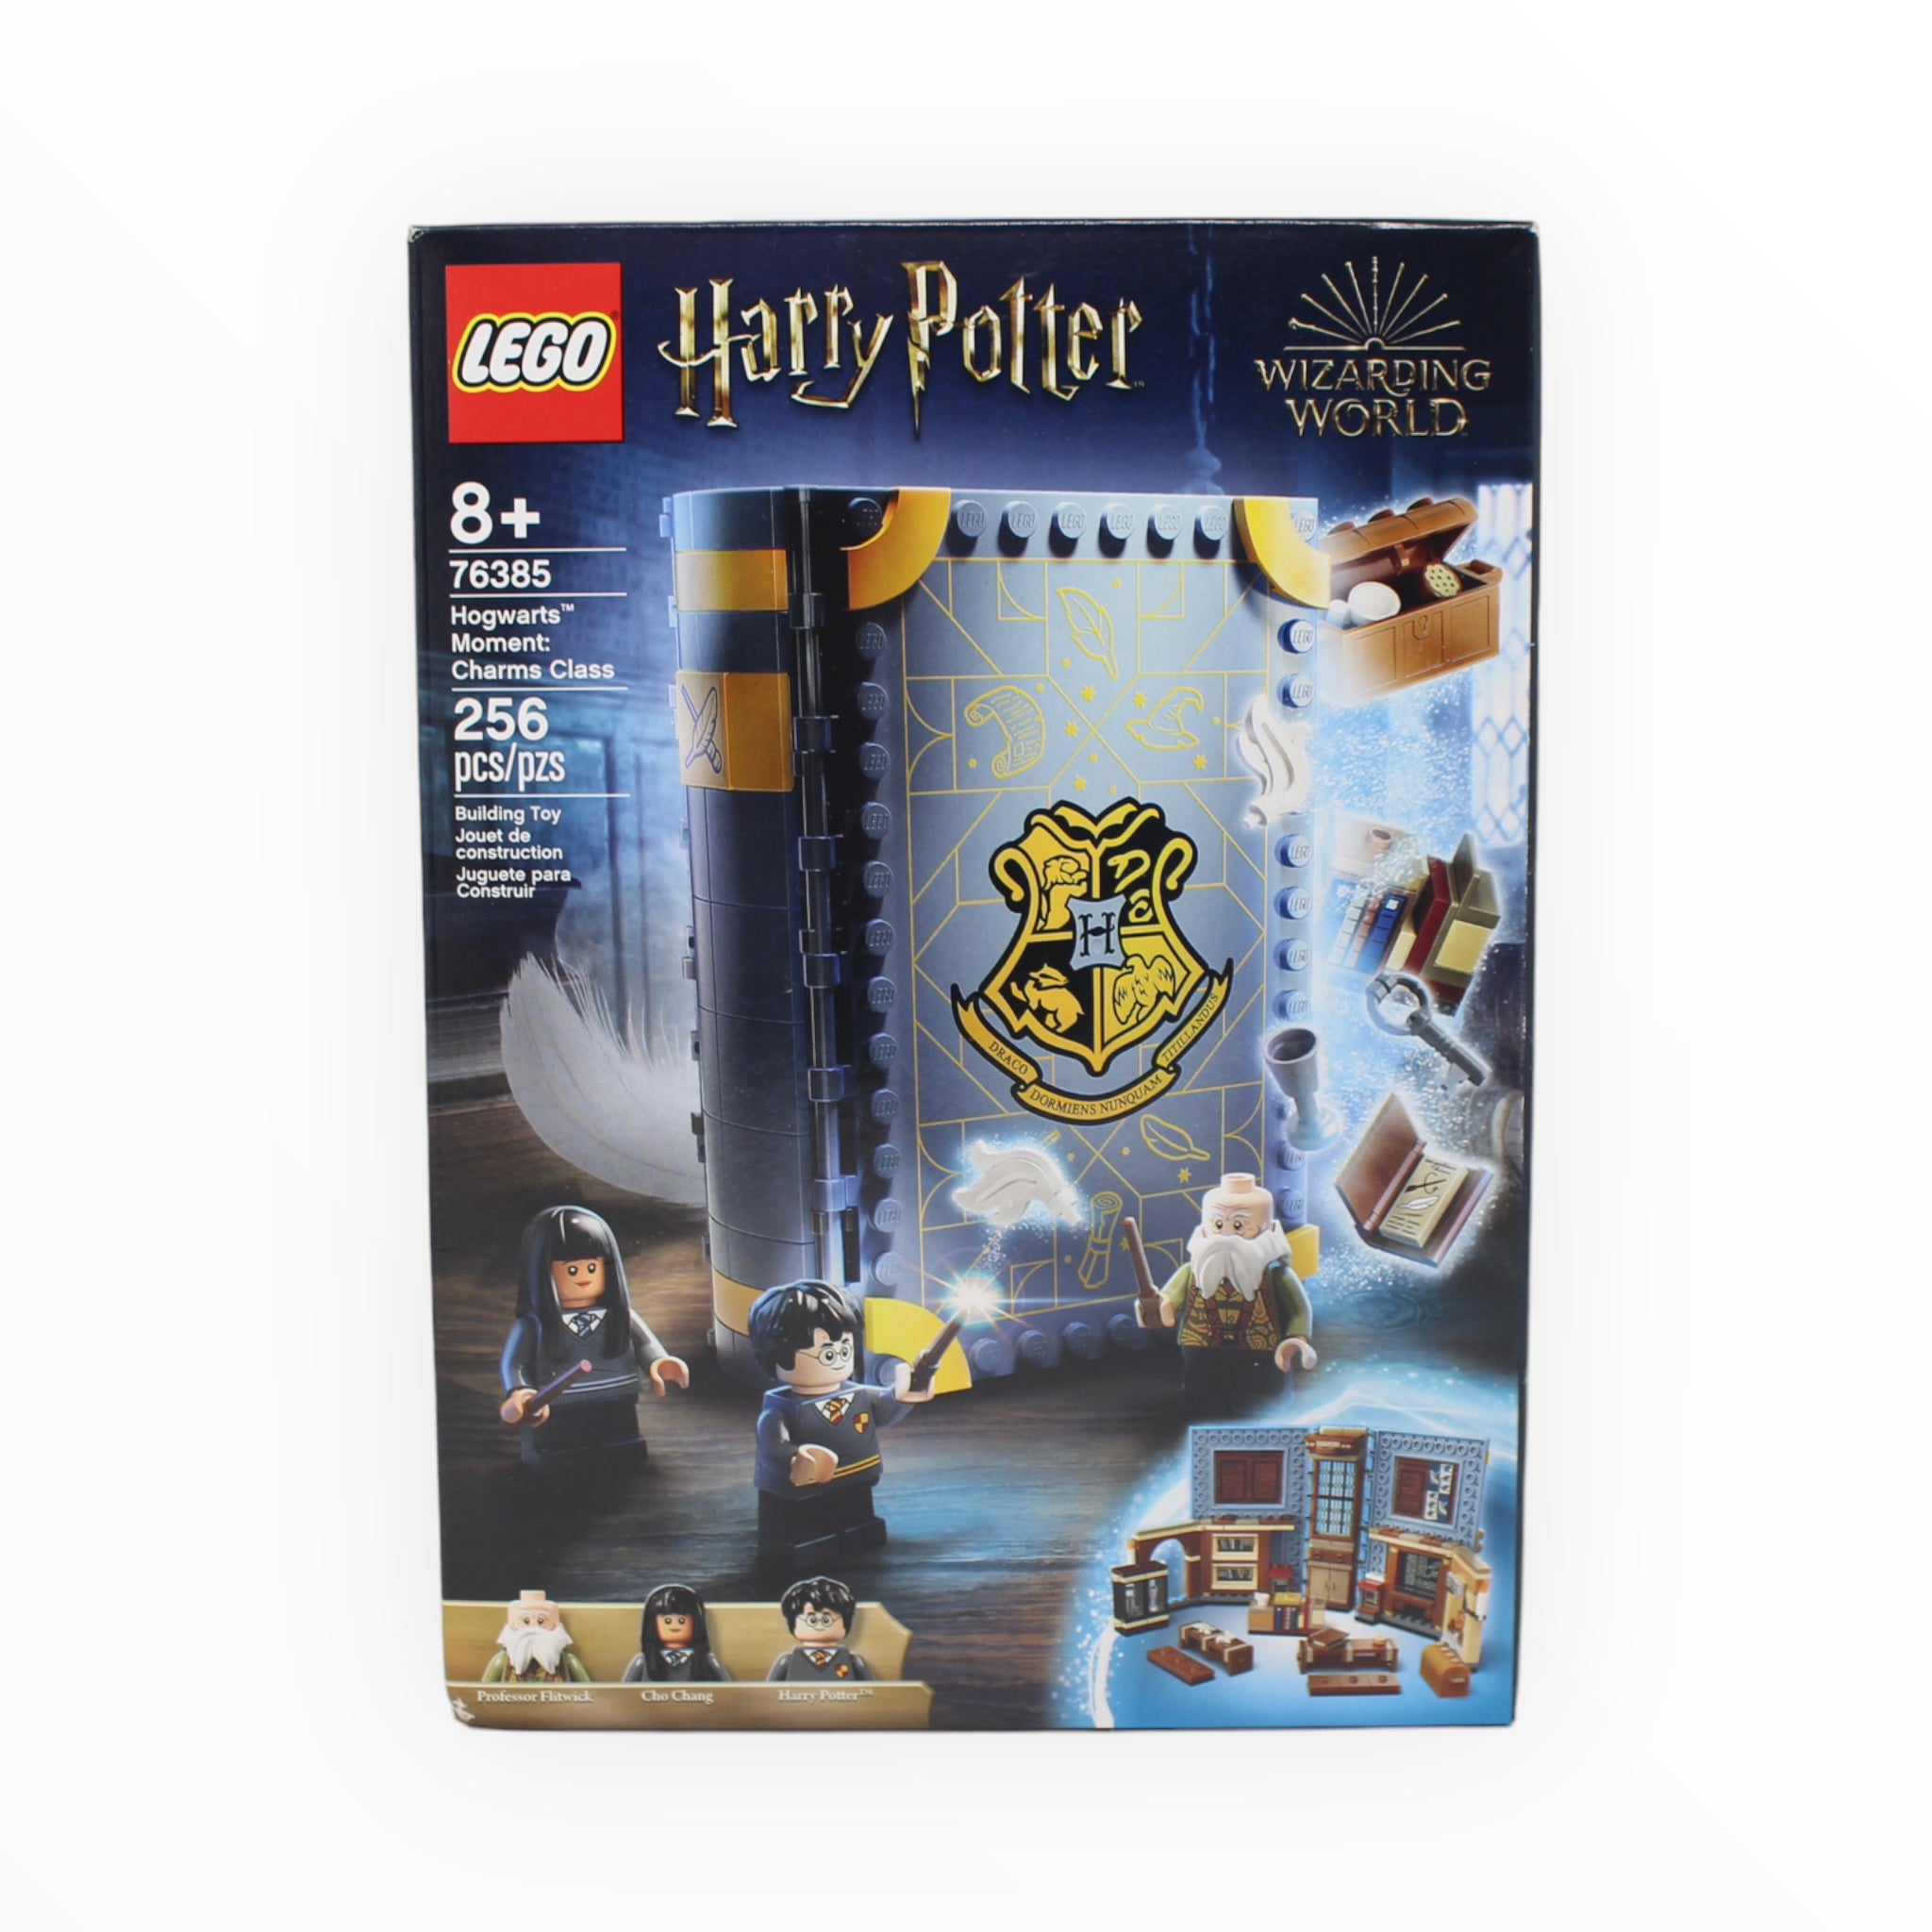 Retired Set 76385 Harry Potter Hogwarts Moment: Charms Class